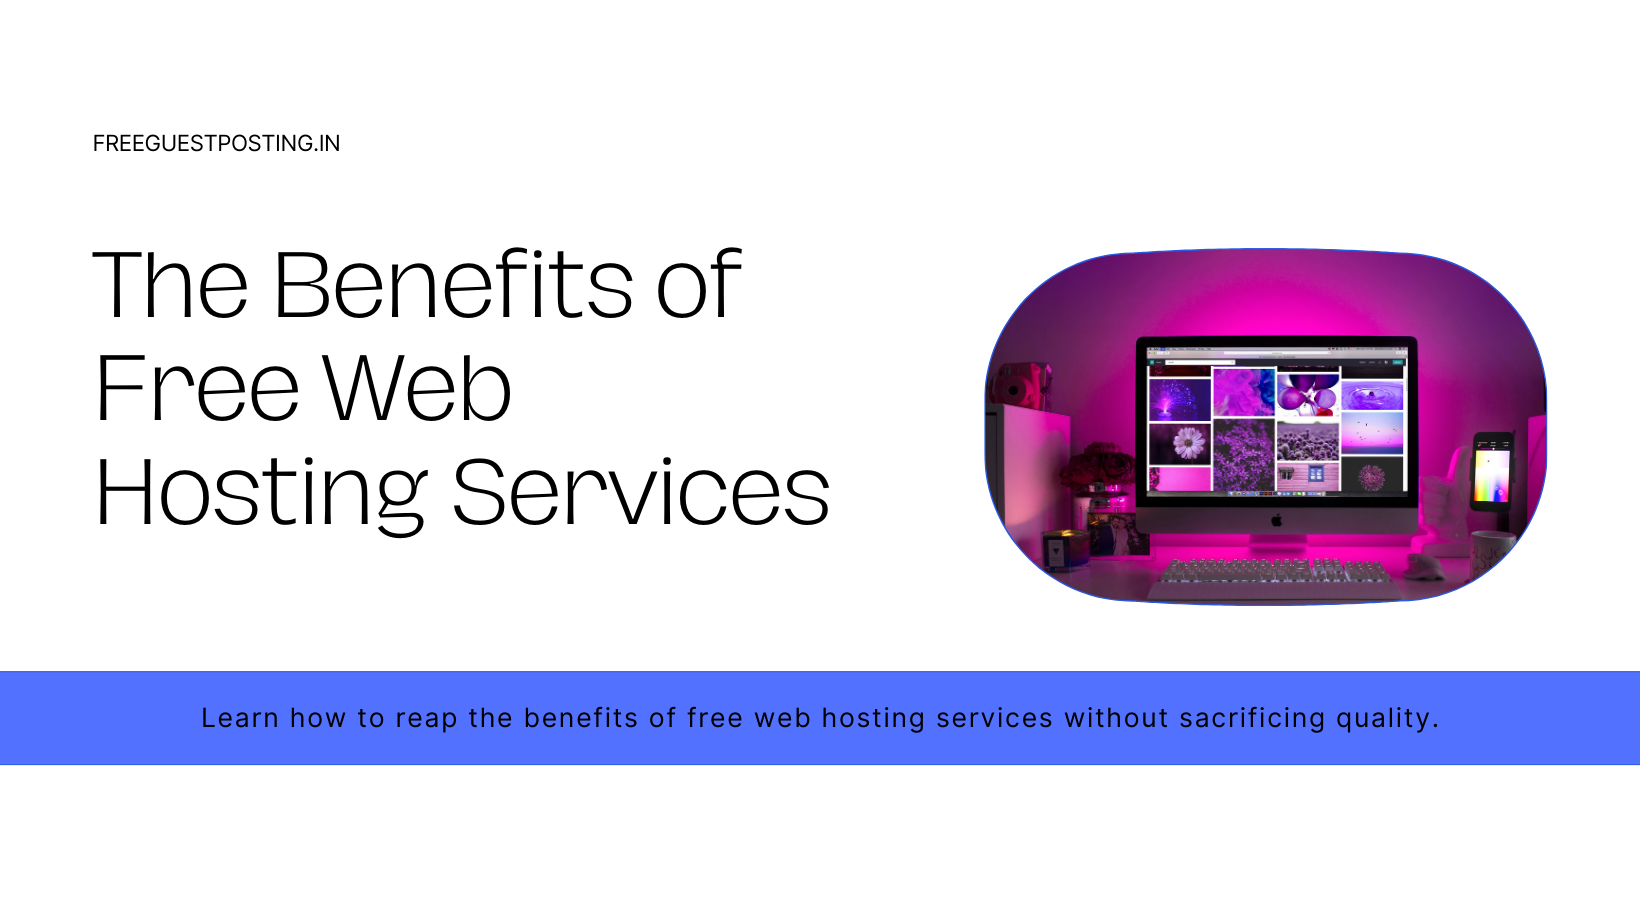 Benefits of Free Web Hosting Services